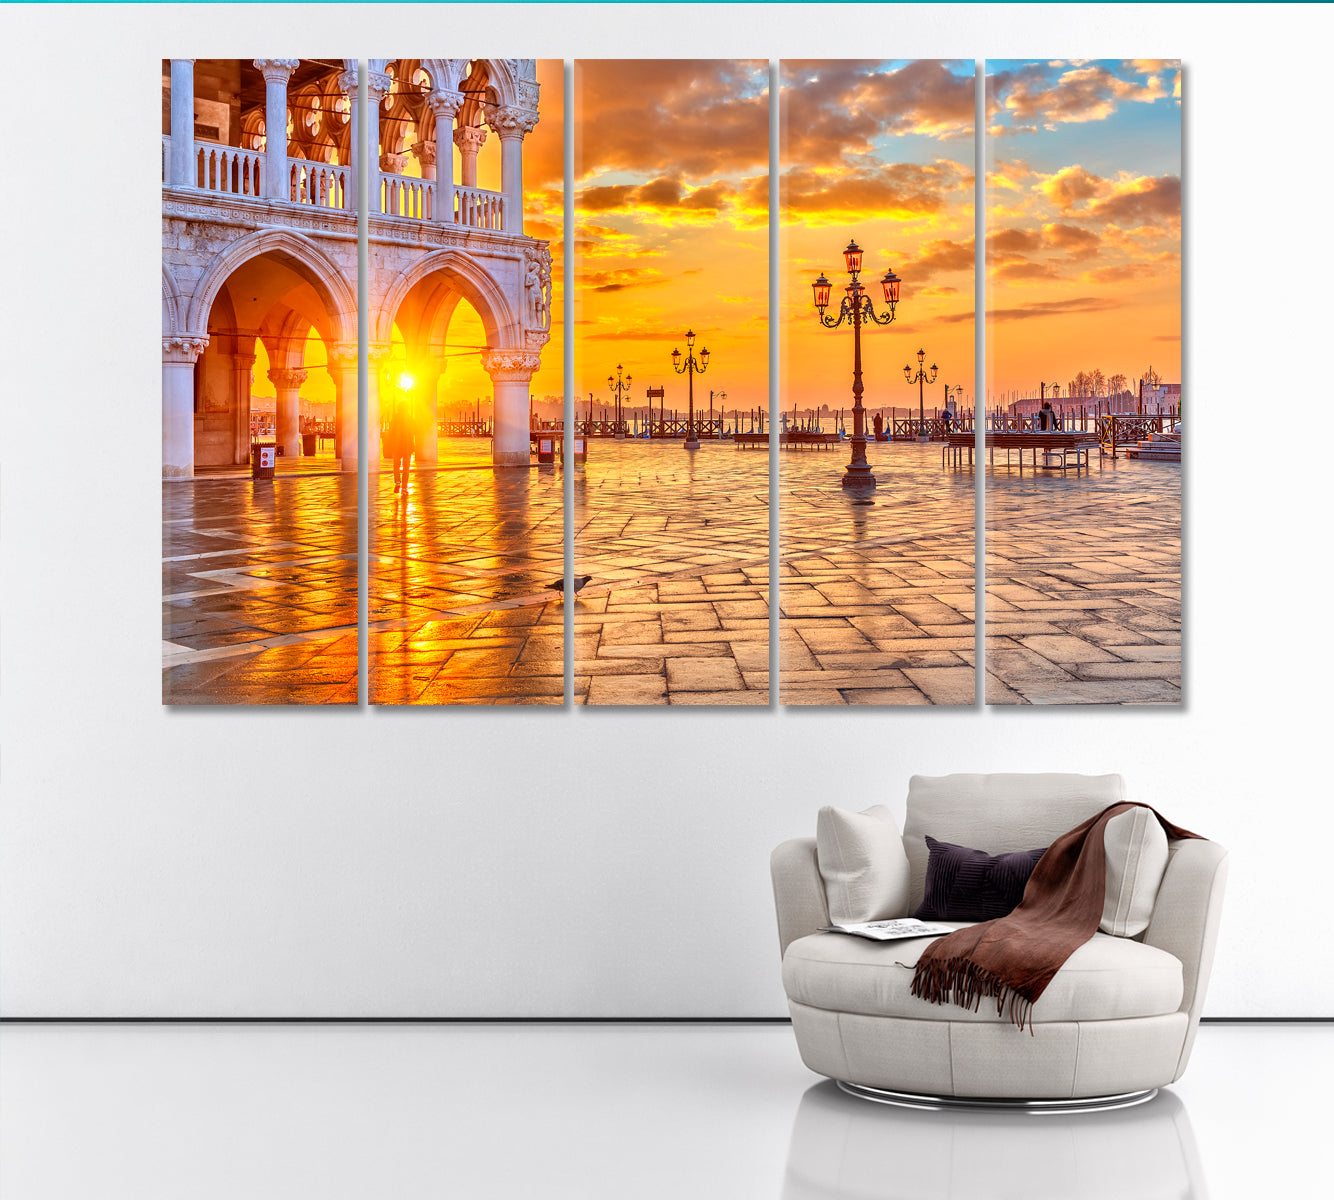 St Mark's Square Piazza San Marco Venice Italy Canvas Print ArtLexy 5 Panels 36"x24" inches 